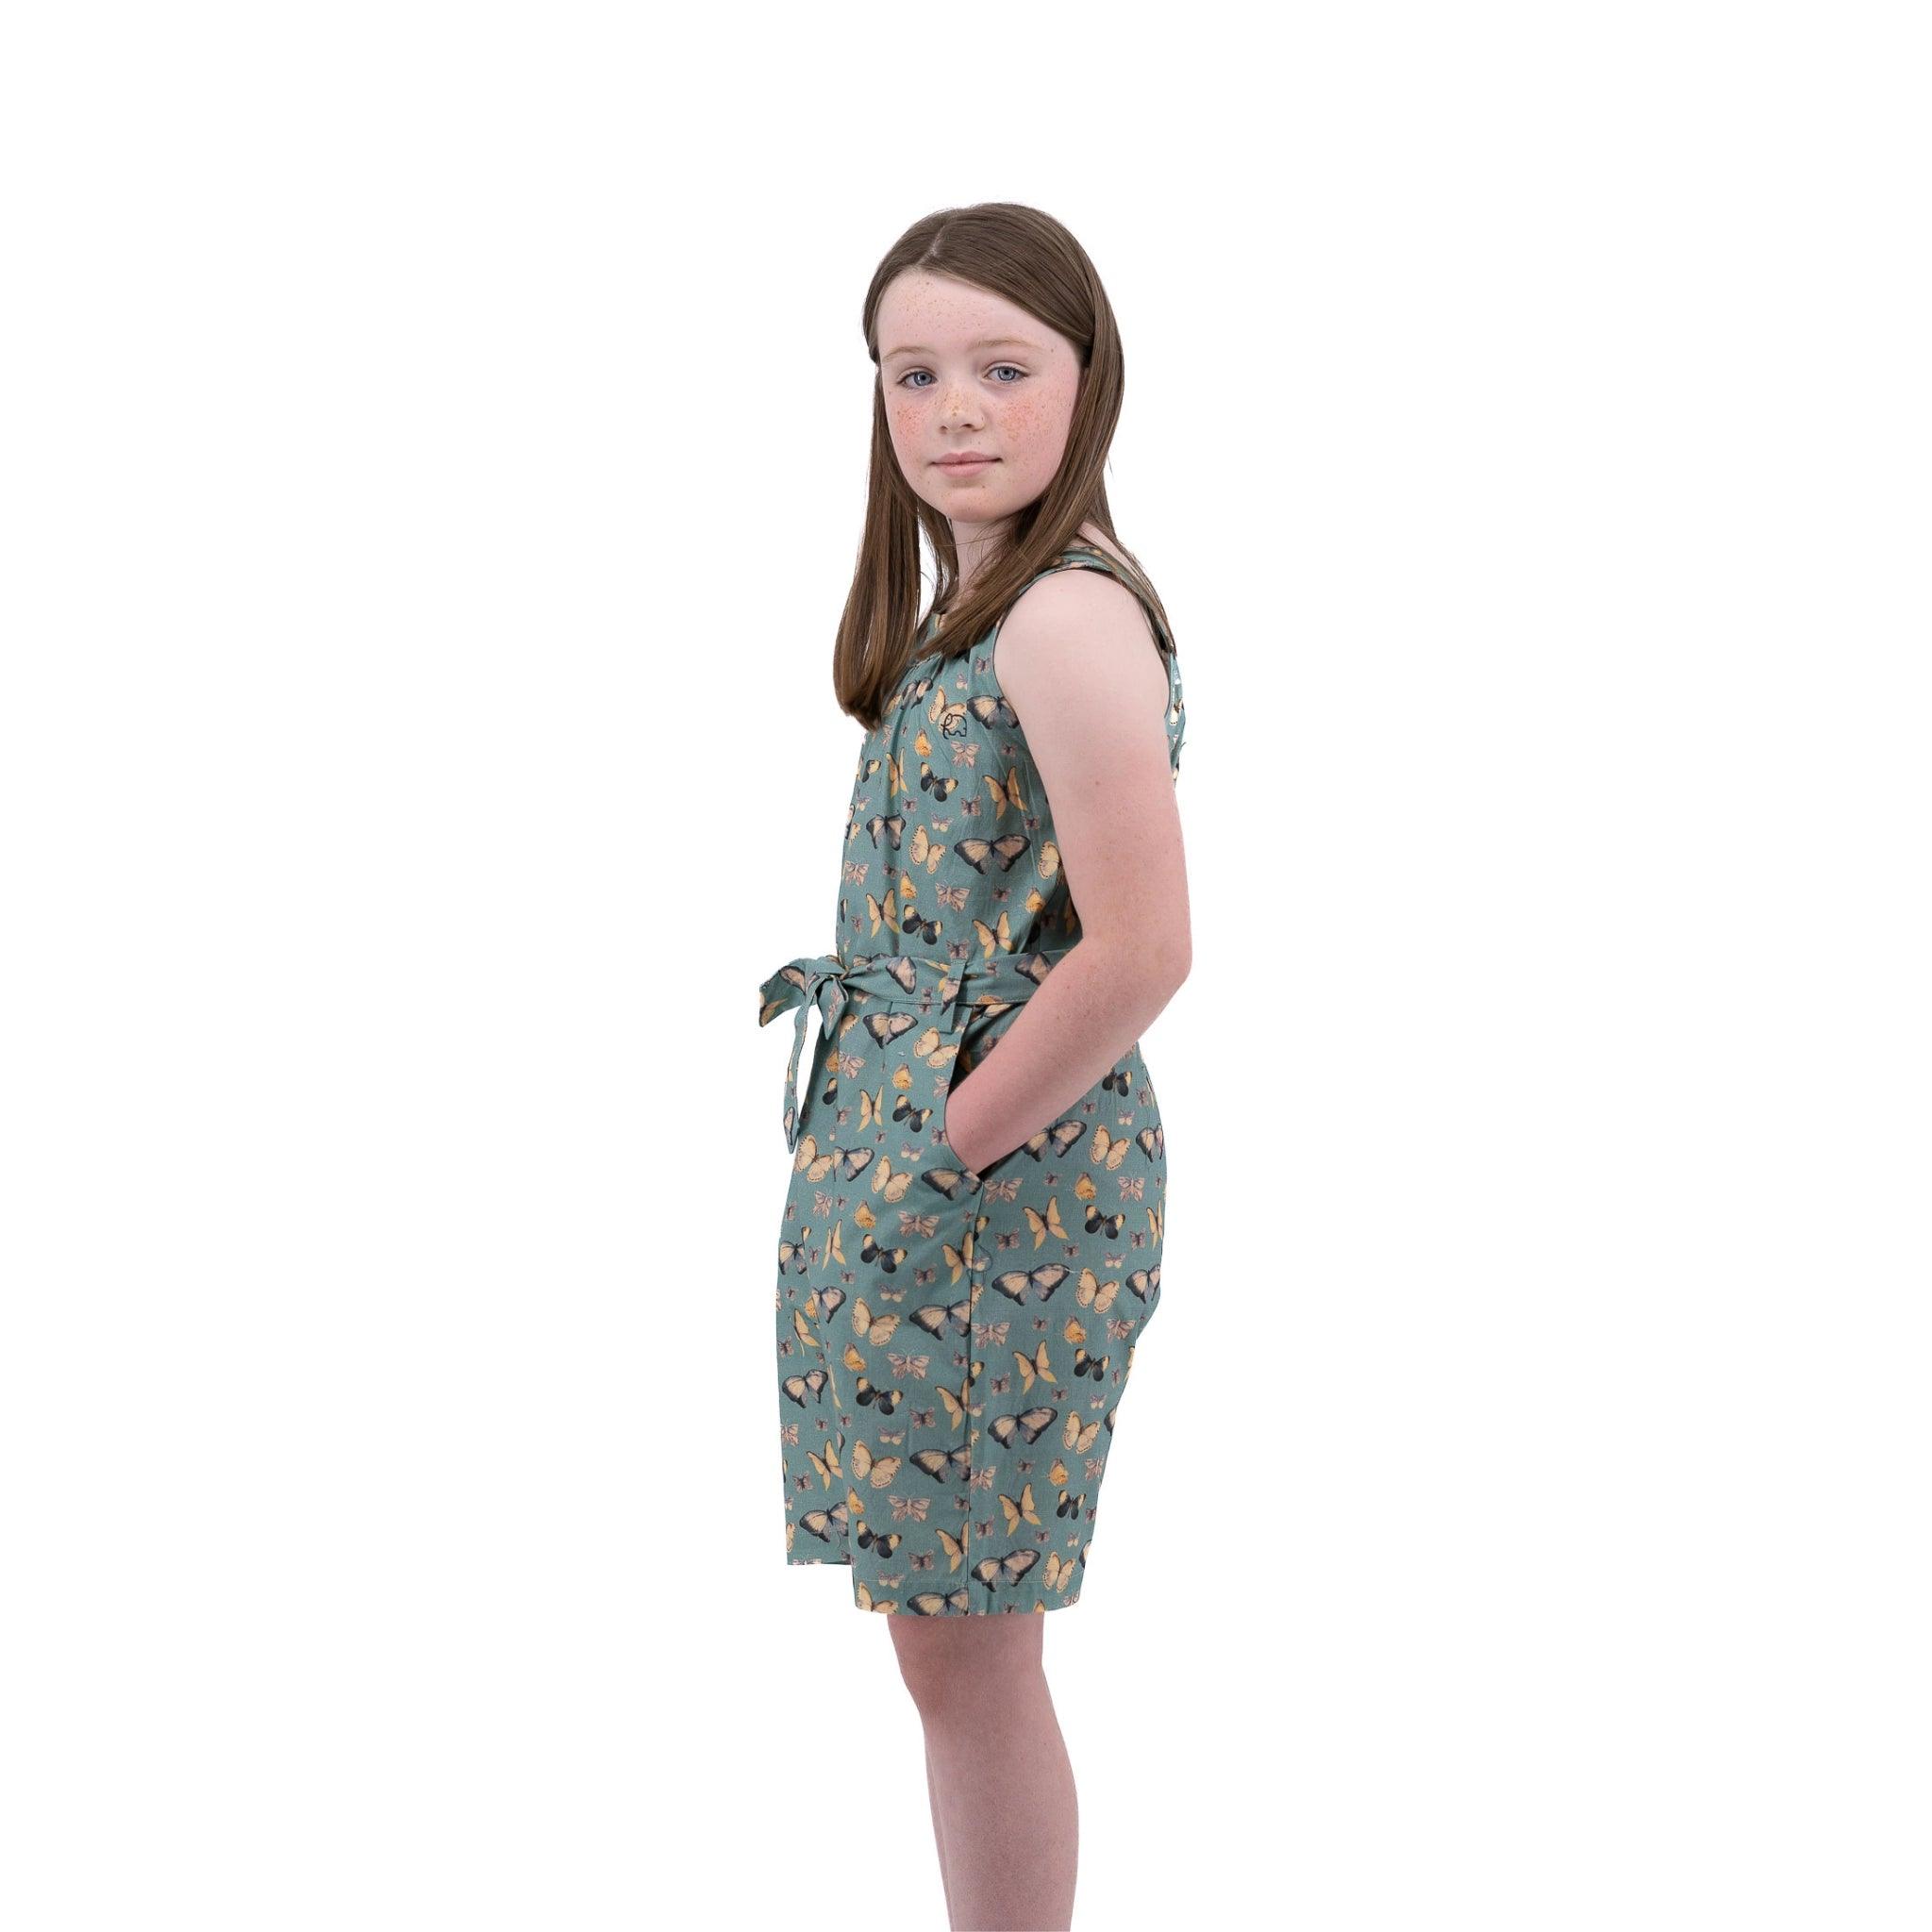 A young girl in a Karee Blue Surf Adventure-ready Cotton Play Suit with butterfly patterns stands against a white background, looking over her shoulder.